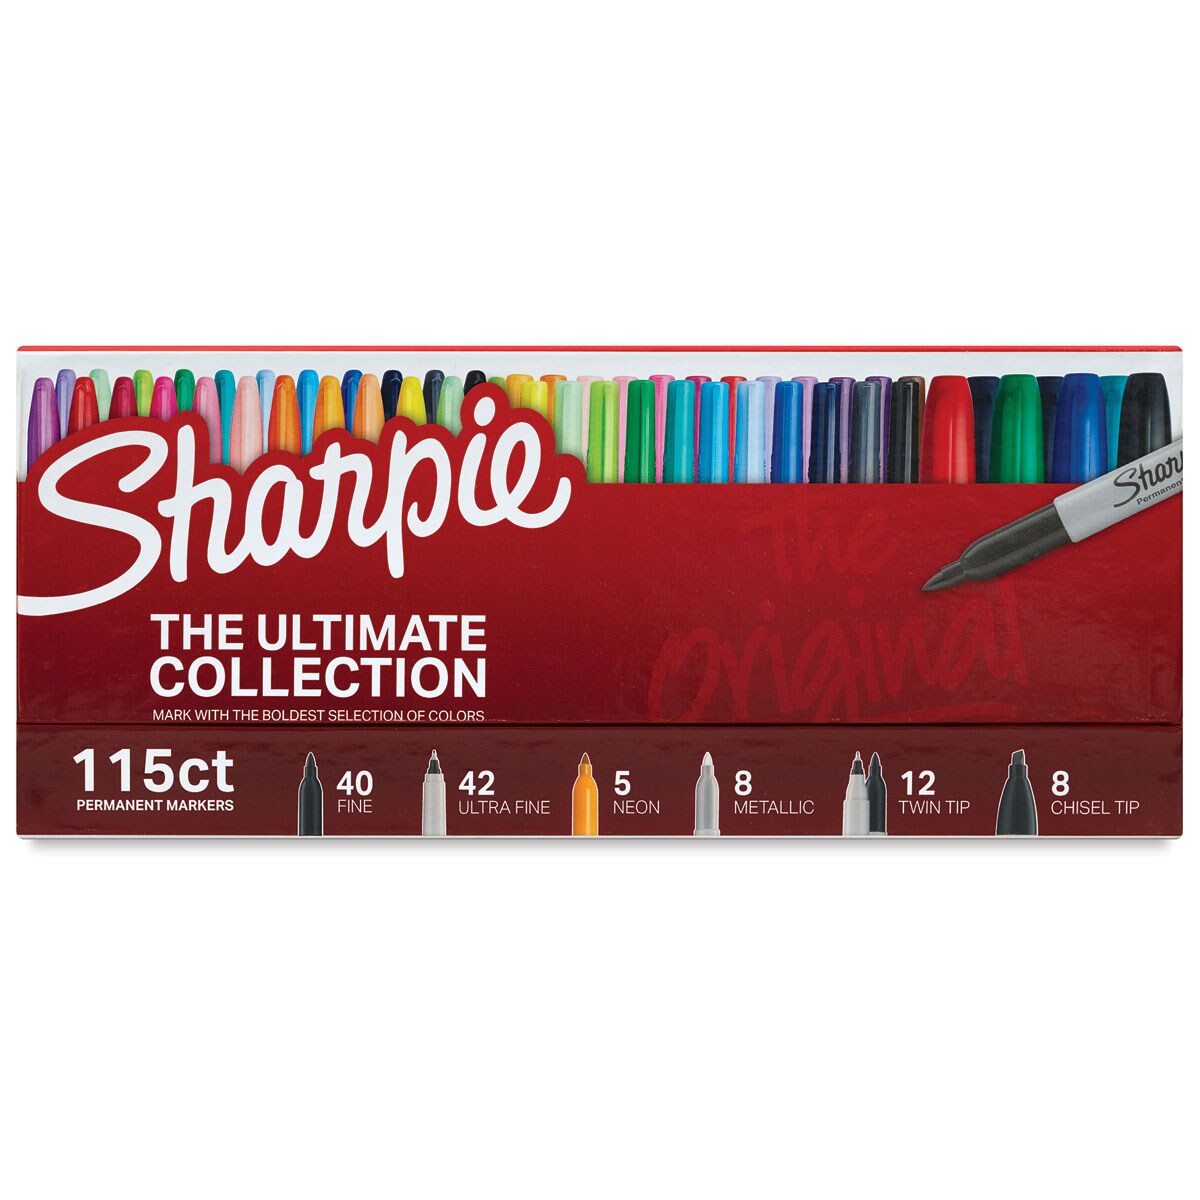 45 Sharpies! Name, Unbox, and Swatch Sharpie Ultimate Collection